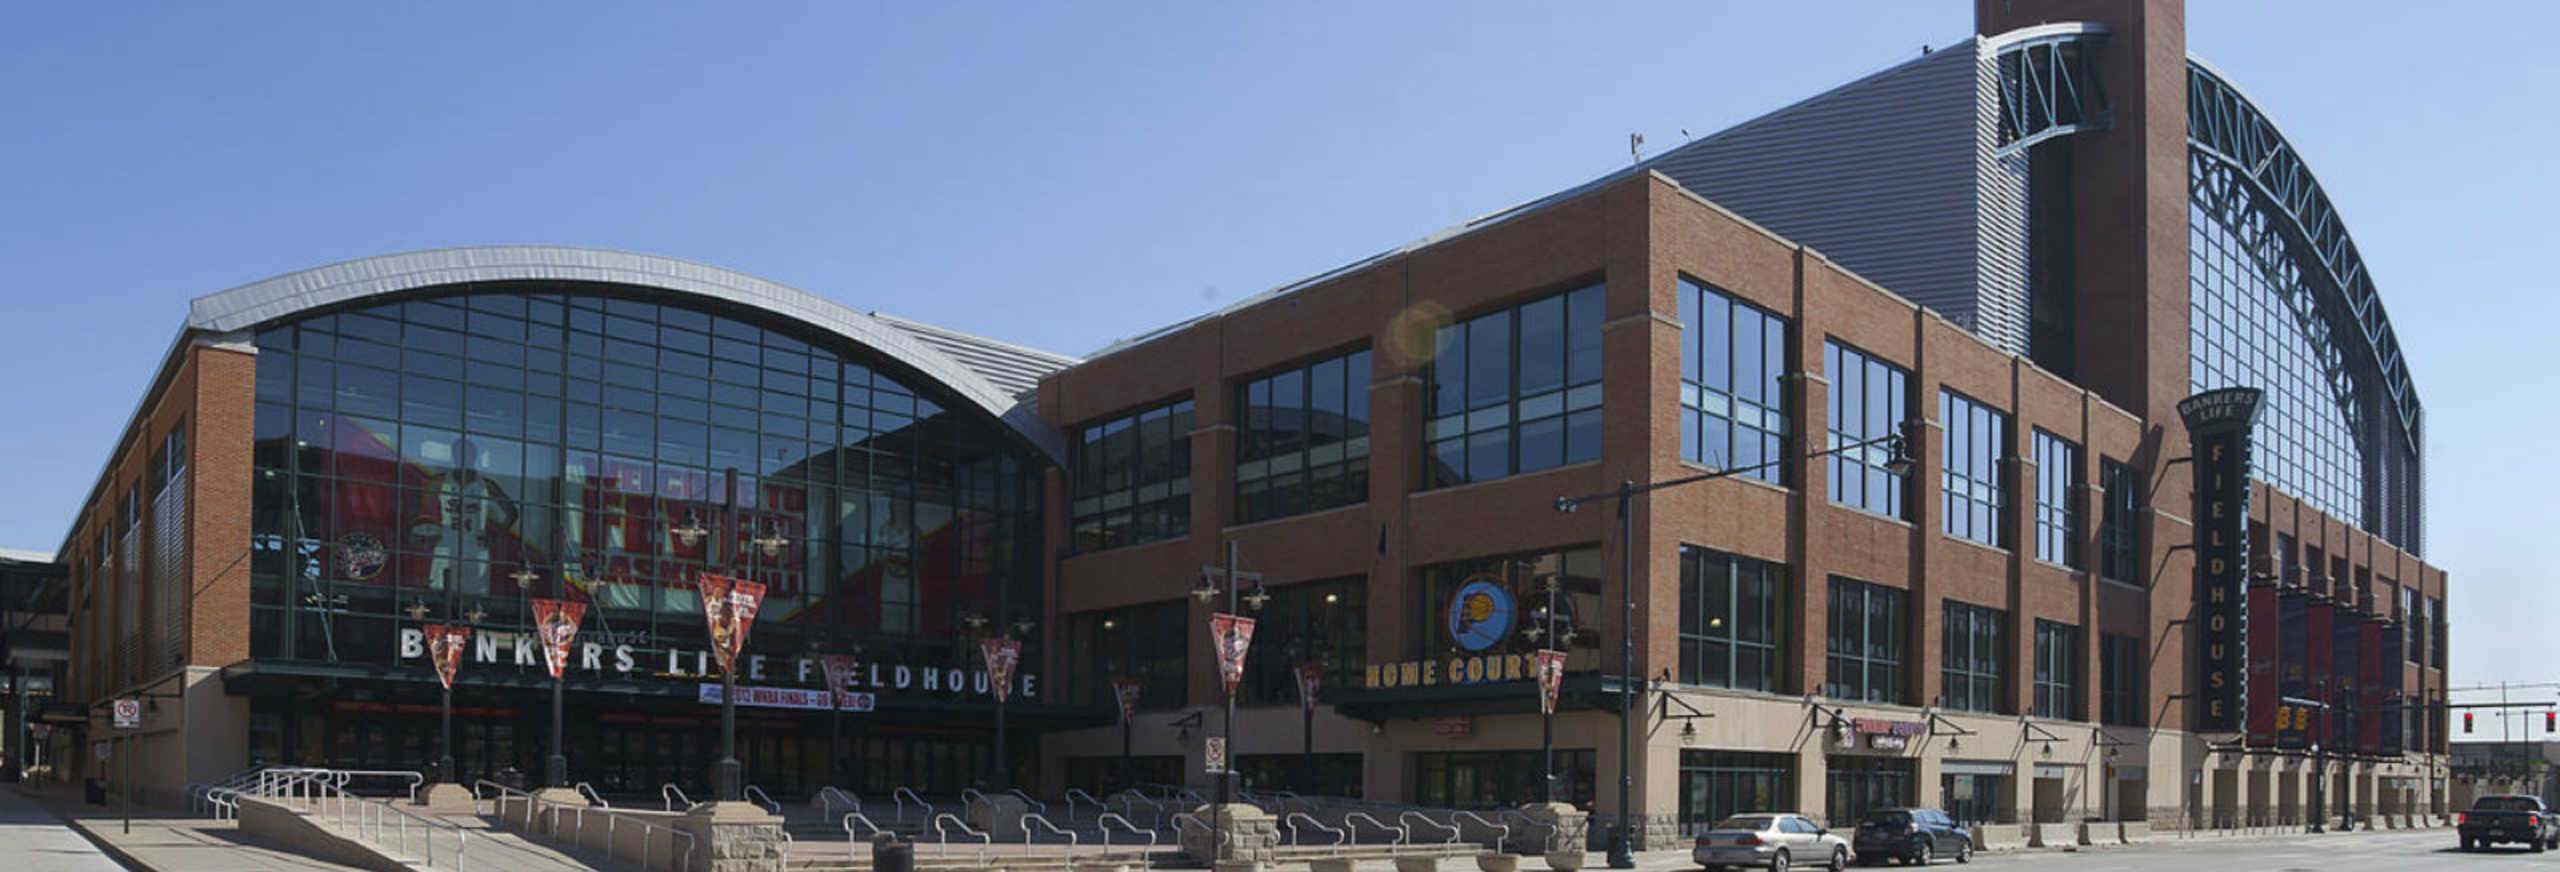 Bankers Life Field House